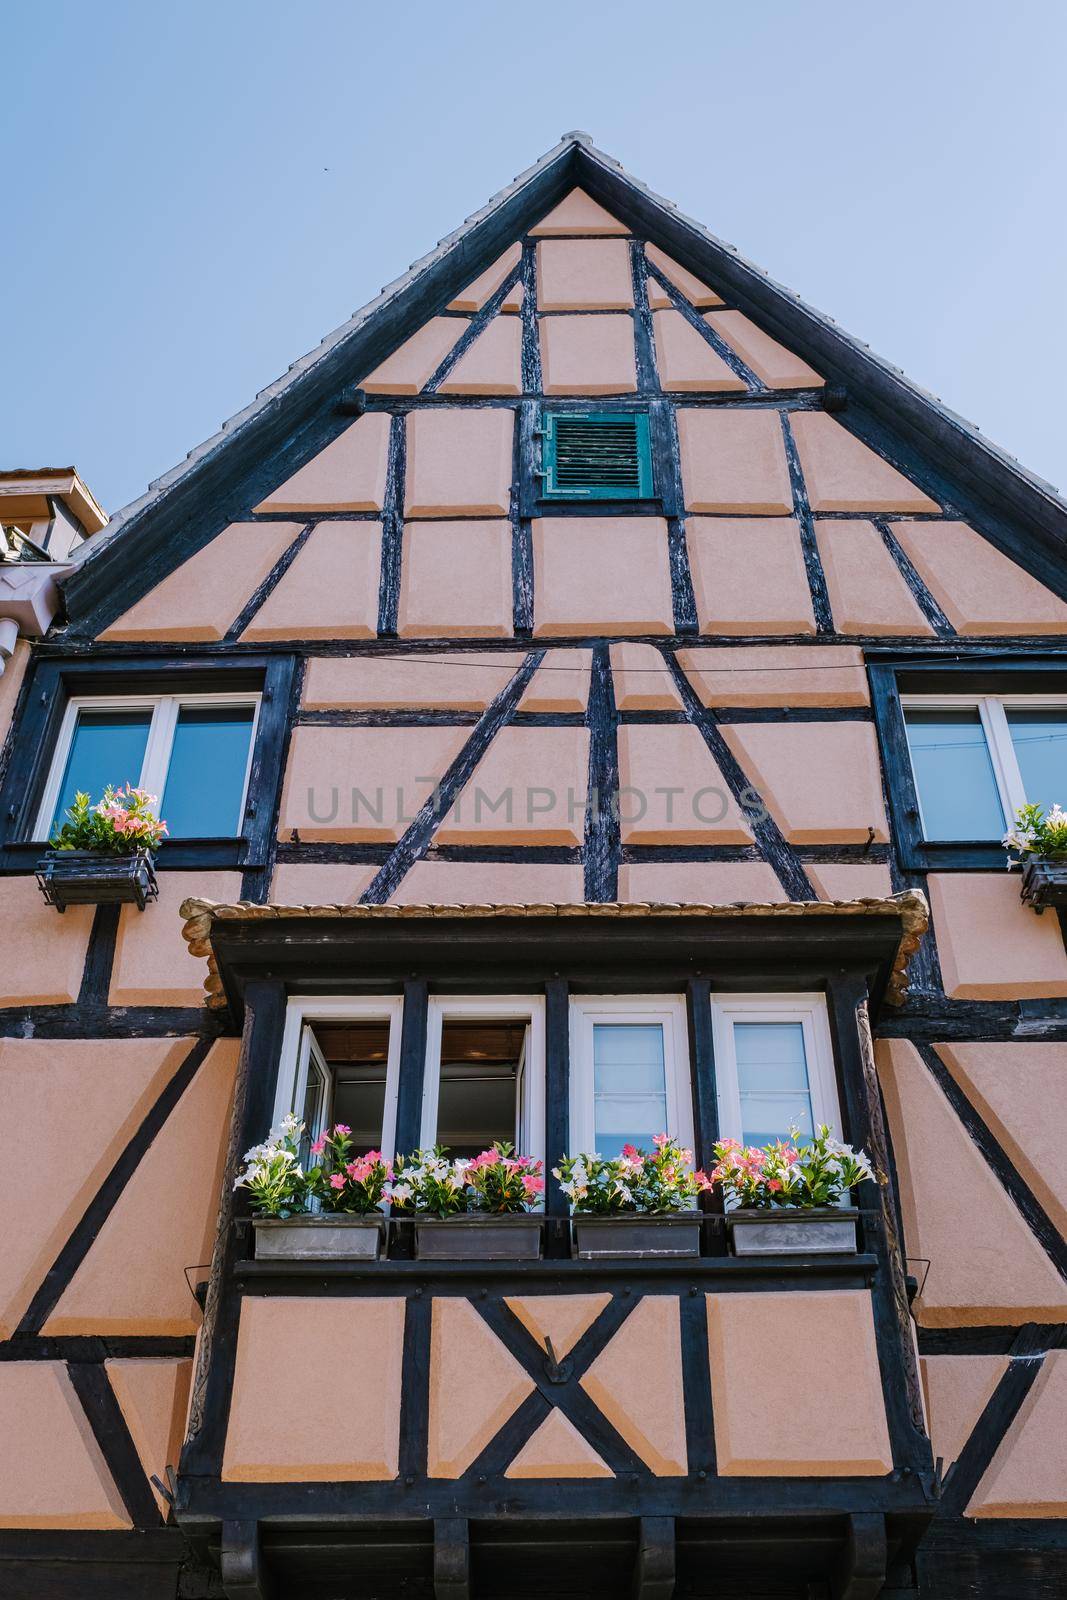 Windows of a house in Eguisheim, Alsace, France by fokkebok